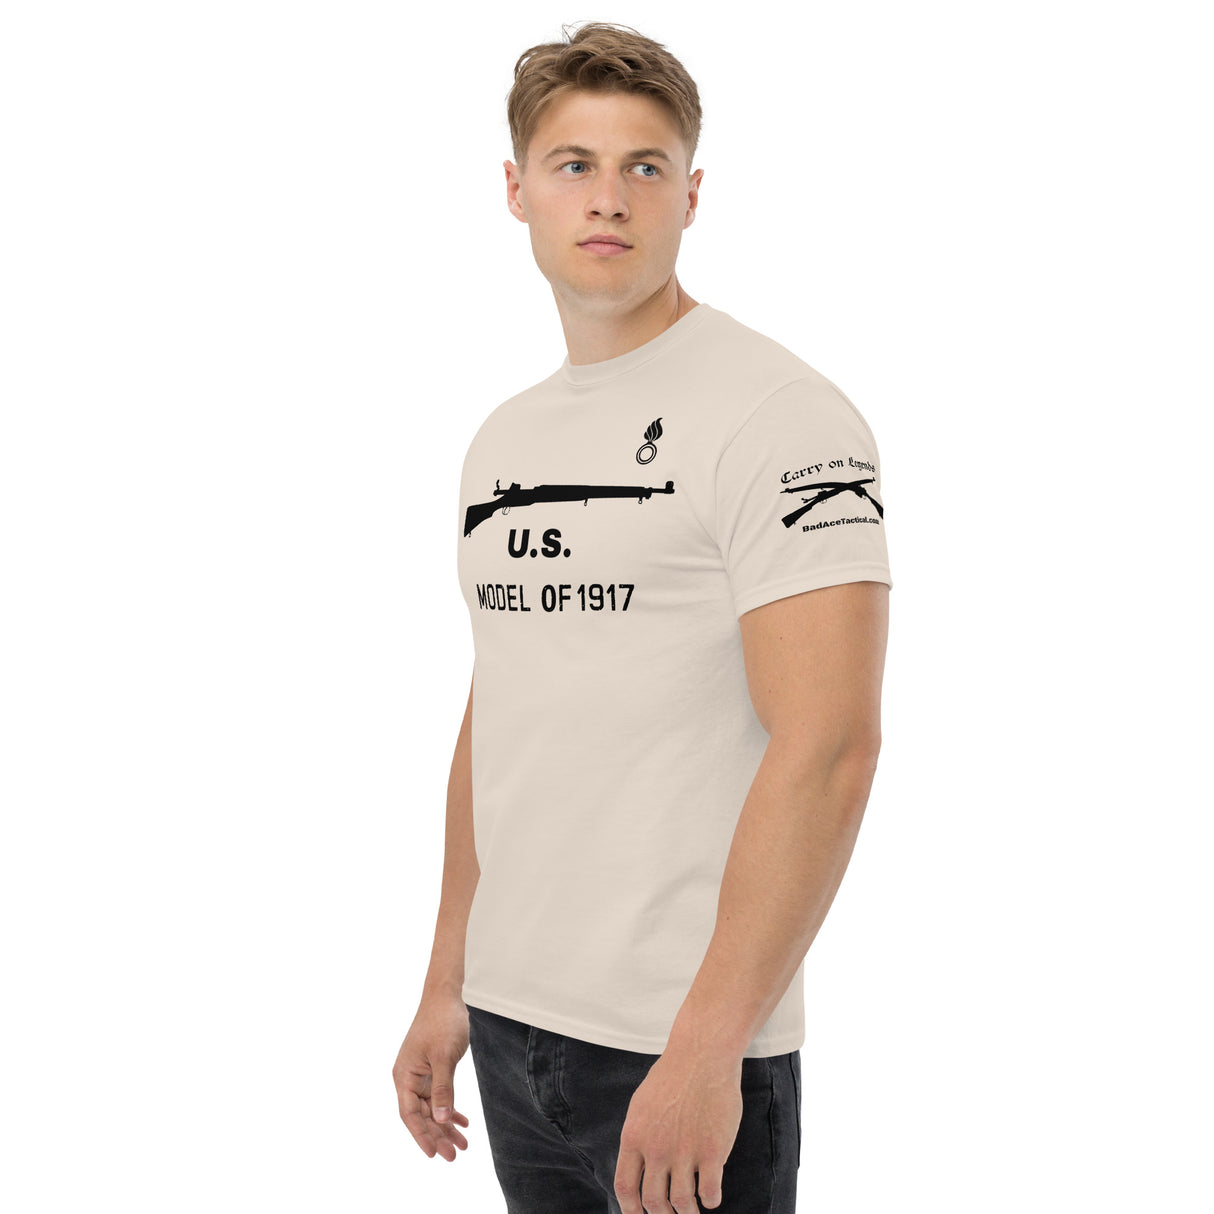 U.S. Model 1917 cotton T-shirt with shell and flame ordnance stamp dark font